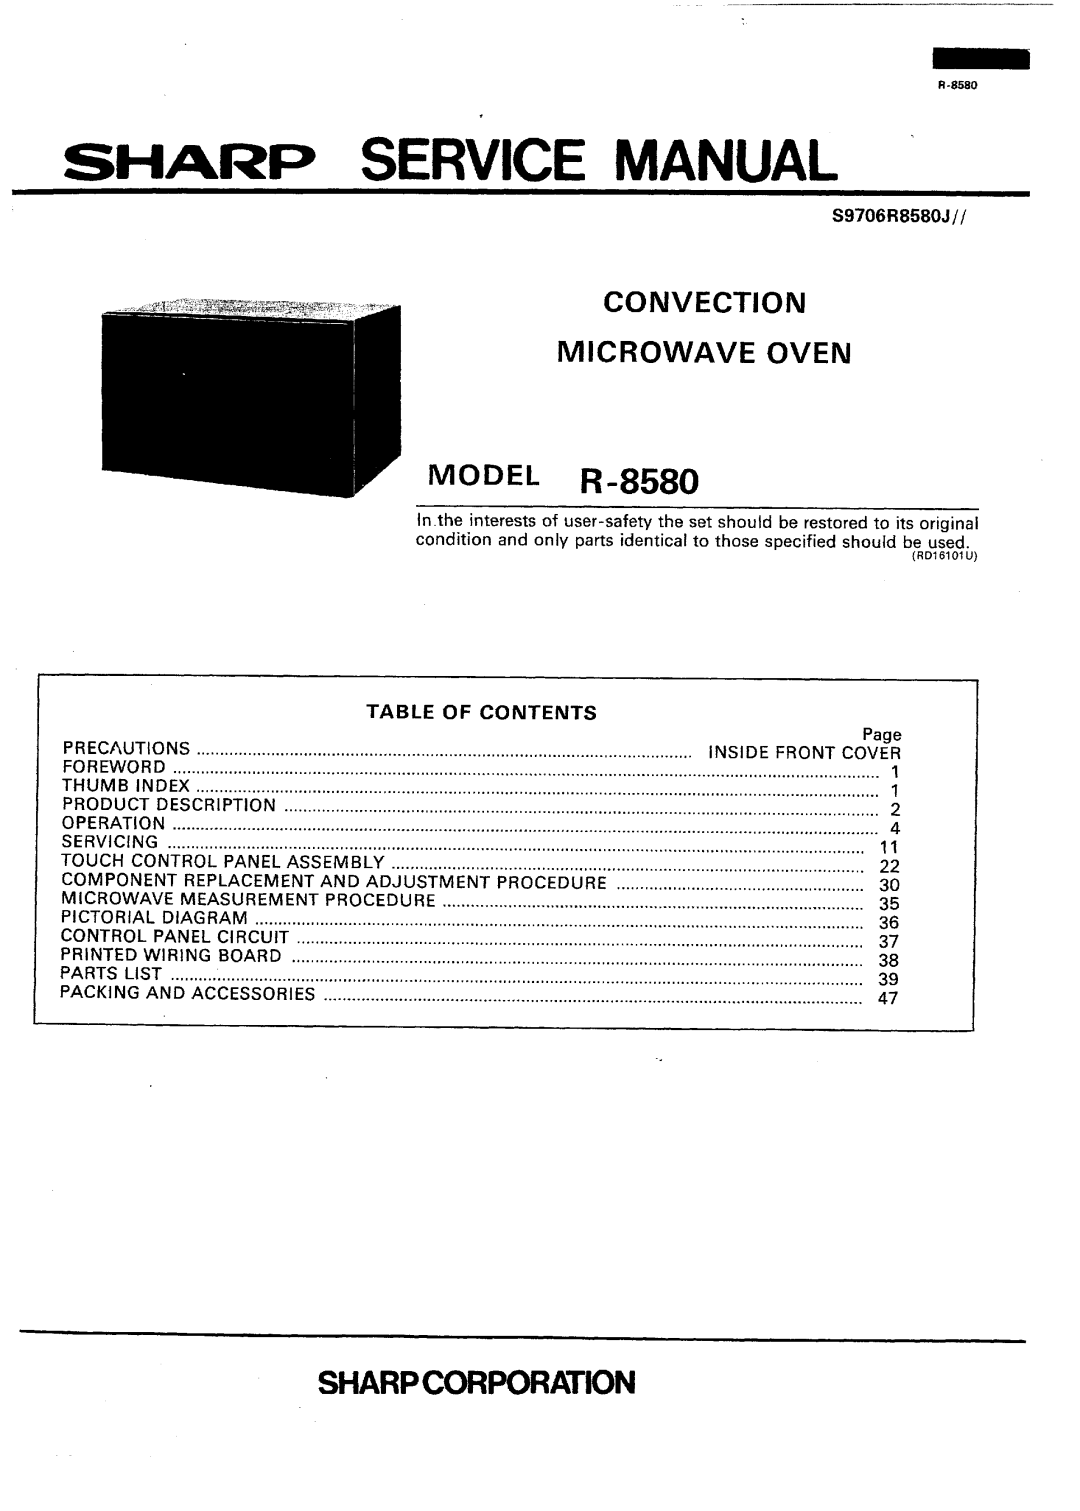 Sharp r-8580 manual Service Manual, Sharpcorporation, Convection Microwave Oven, Tame Of, Contents 